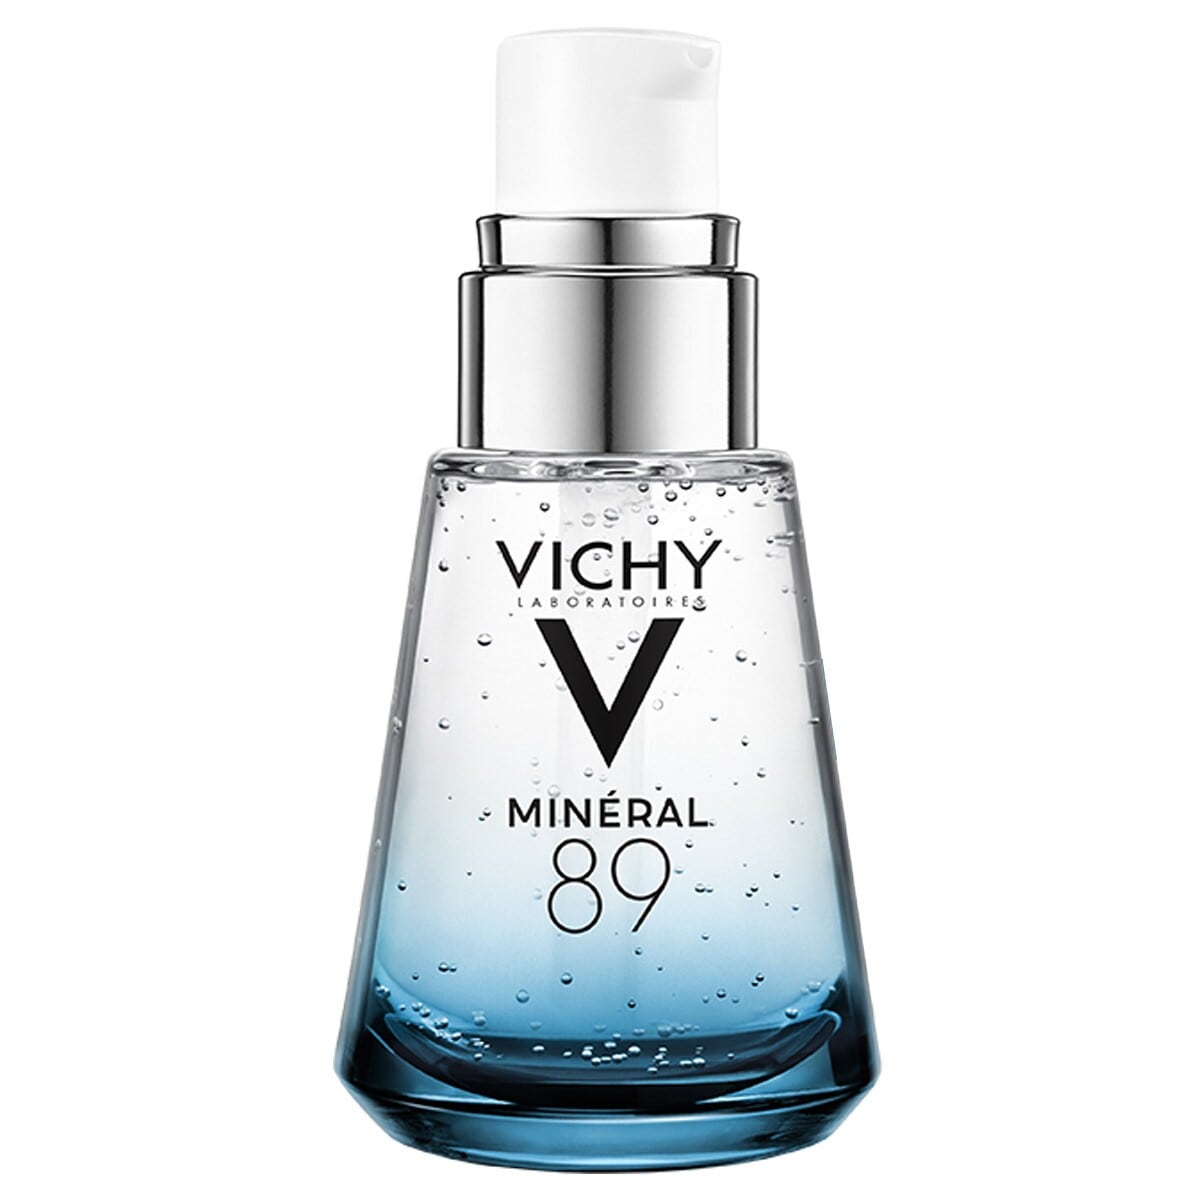 VICHY Mineral 89 MINERAL 89 Elixir